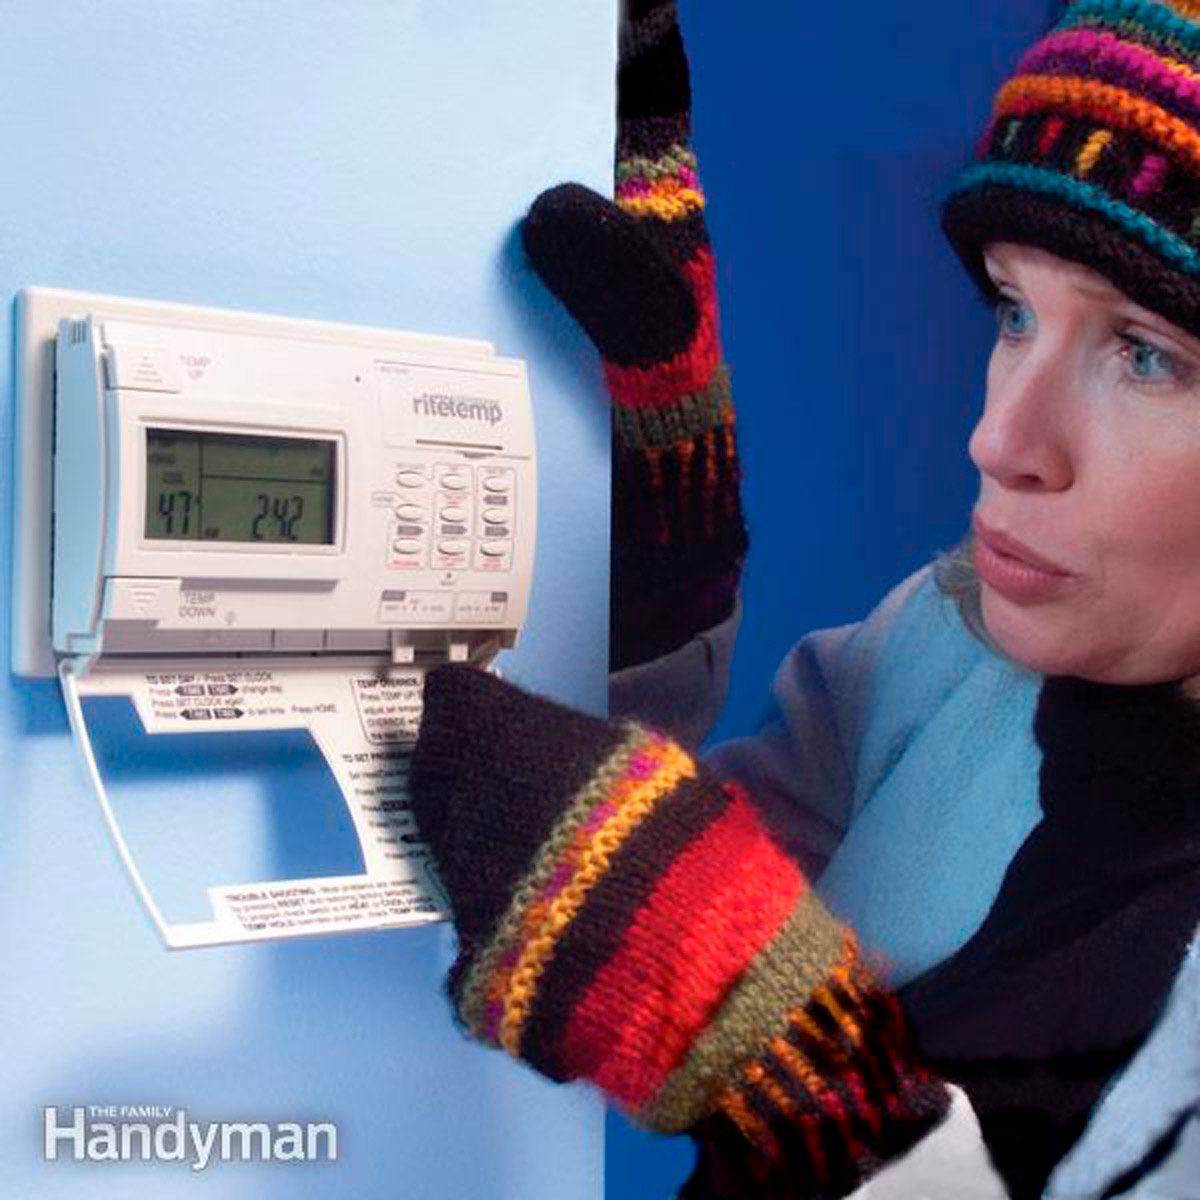 8 Simple Fixes if Your Heater Is Not Working